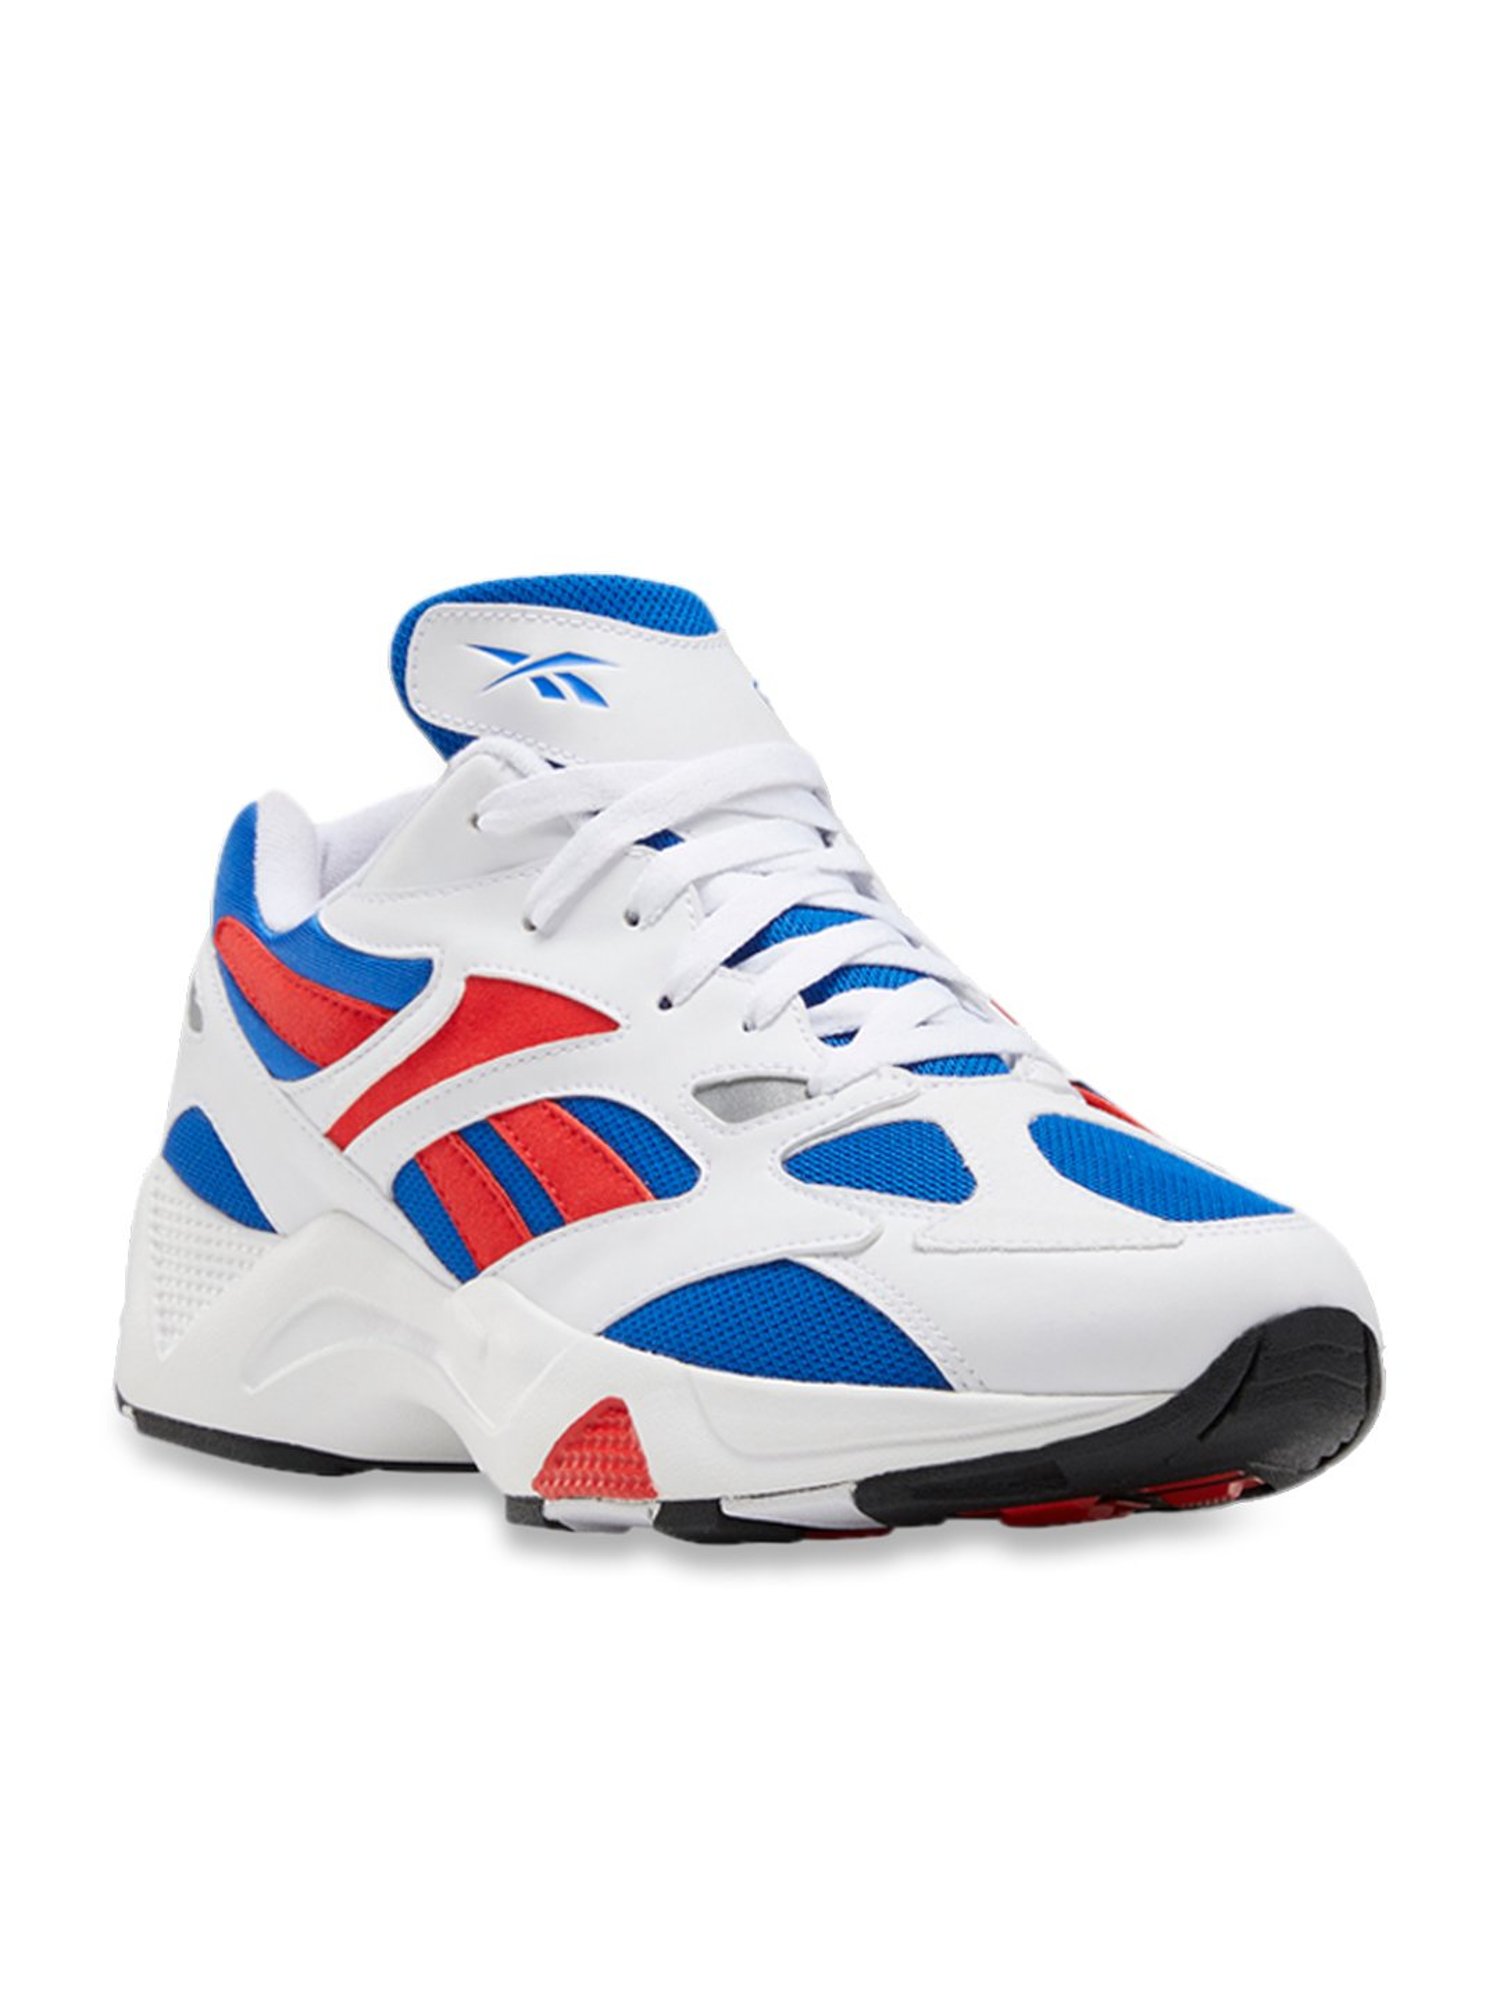 Buy Reebok Classics 96 White Blue Sneakers for at Best Price @ CLiQ